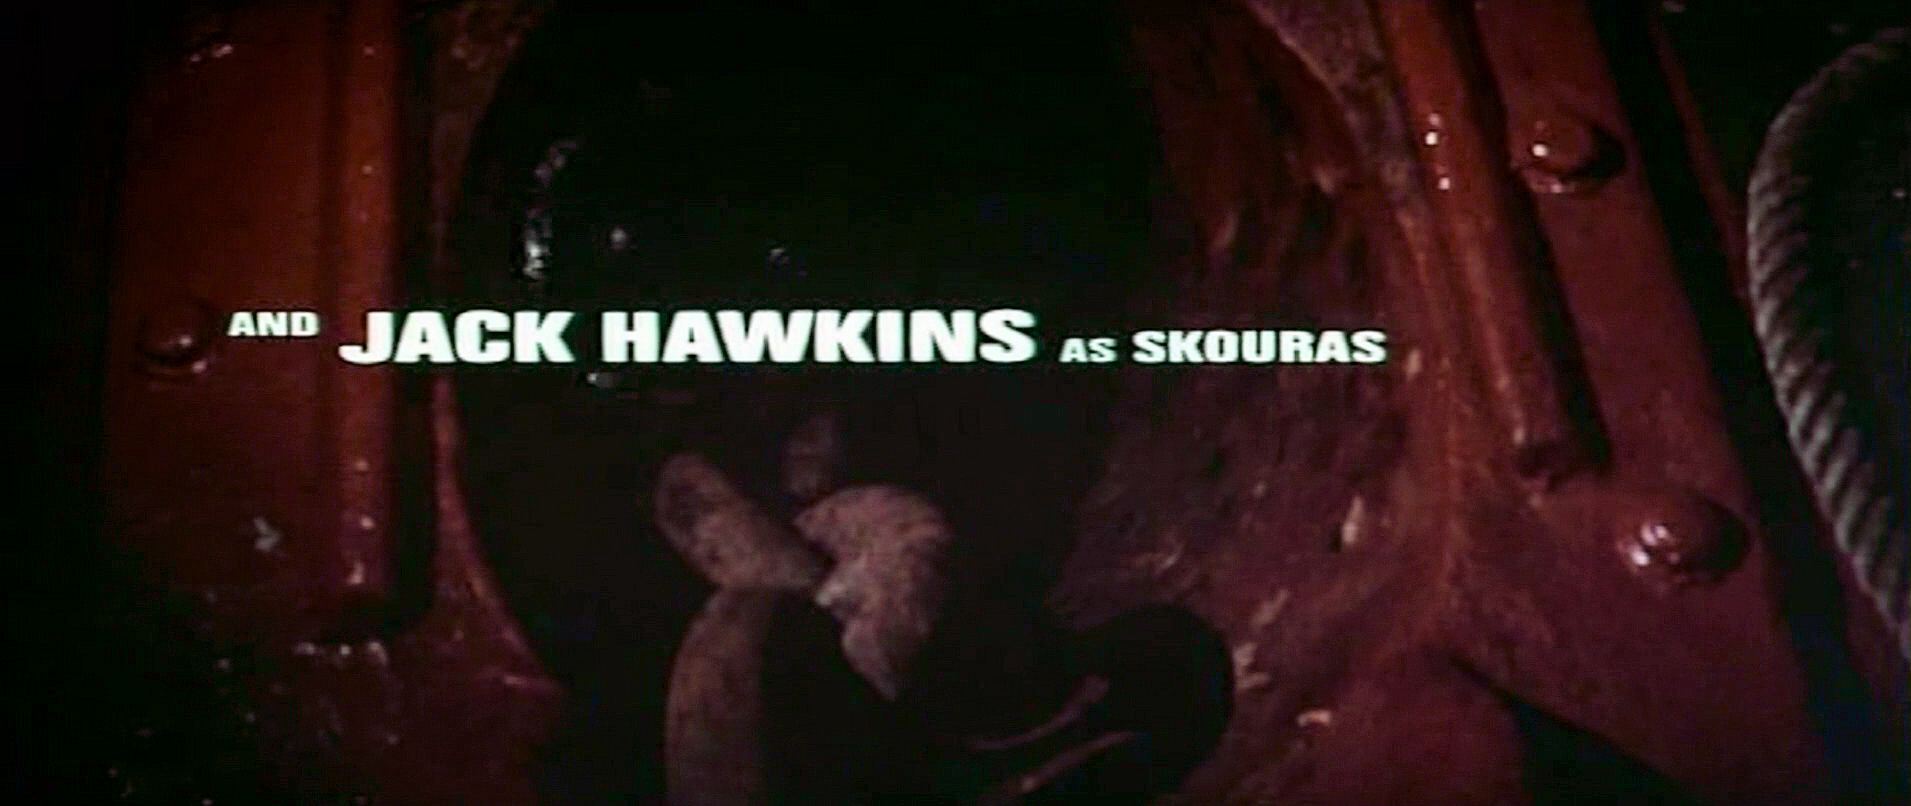 Main title from When Eight Bells Toll (1971) (7).  And Jack Hawkins as Skouras